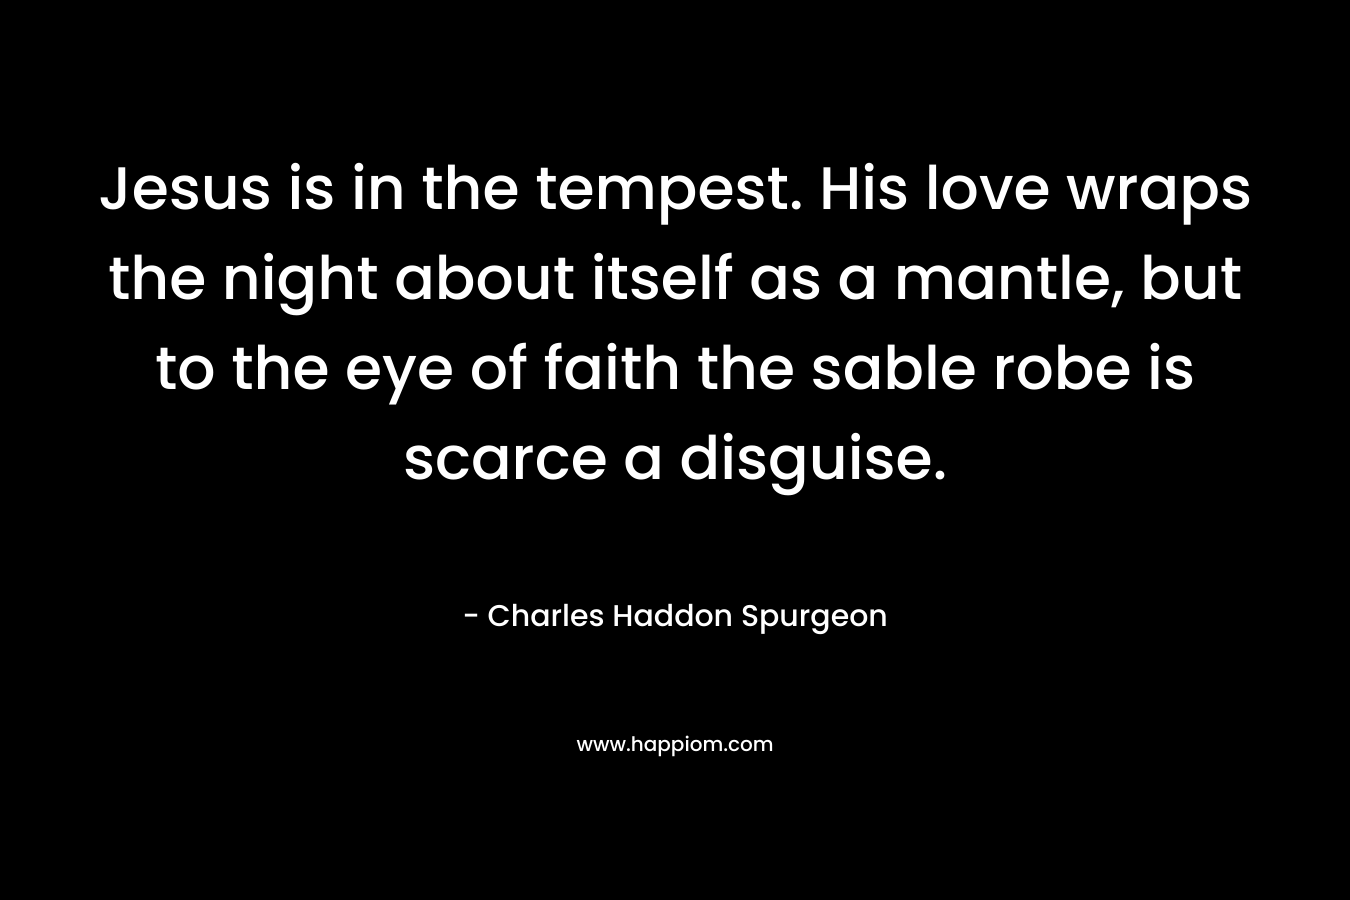 Jesus is in the tempest. His love wraps the night about itself as a mantle, but to the eye of faith the sable robe is scarce a disguise. – Charles Haddon Spurgeon